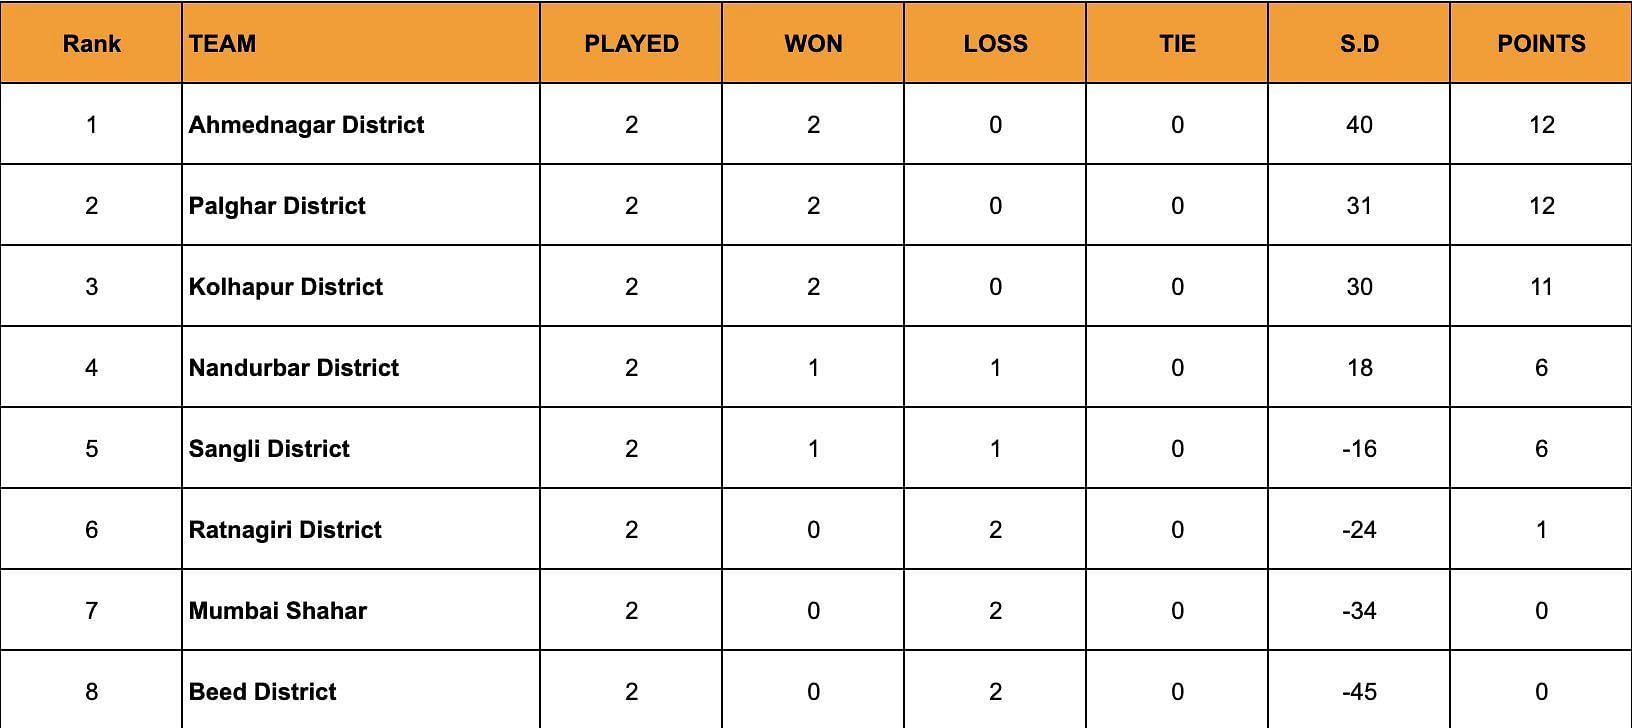 A look at the standings after the conclusion of Day 16.